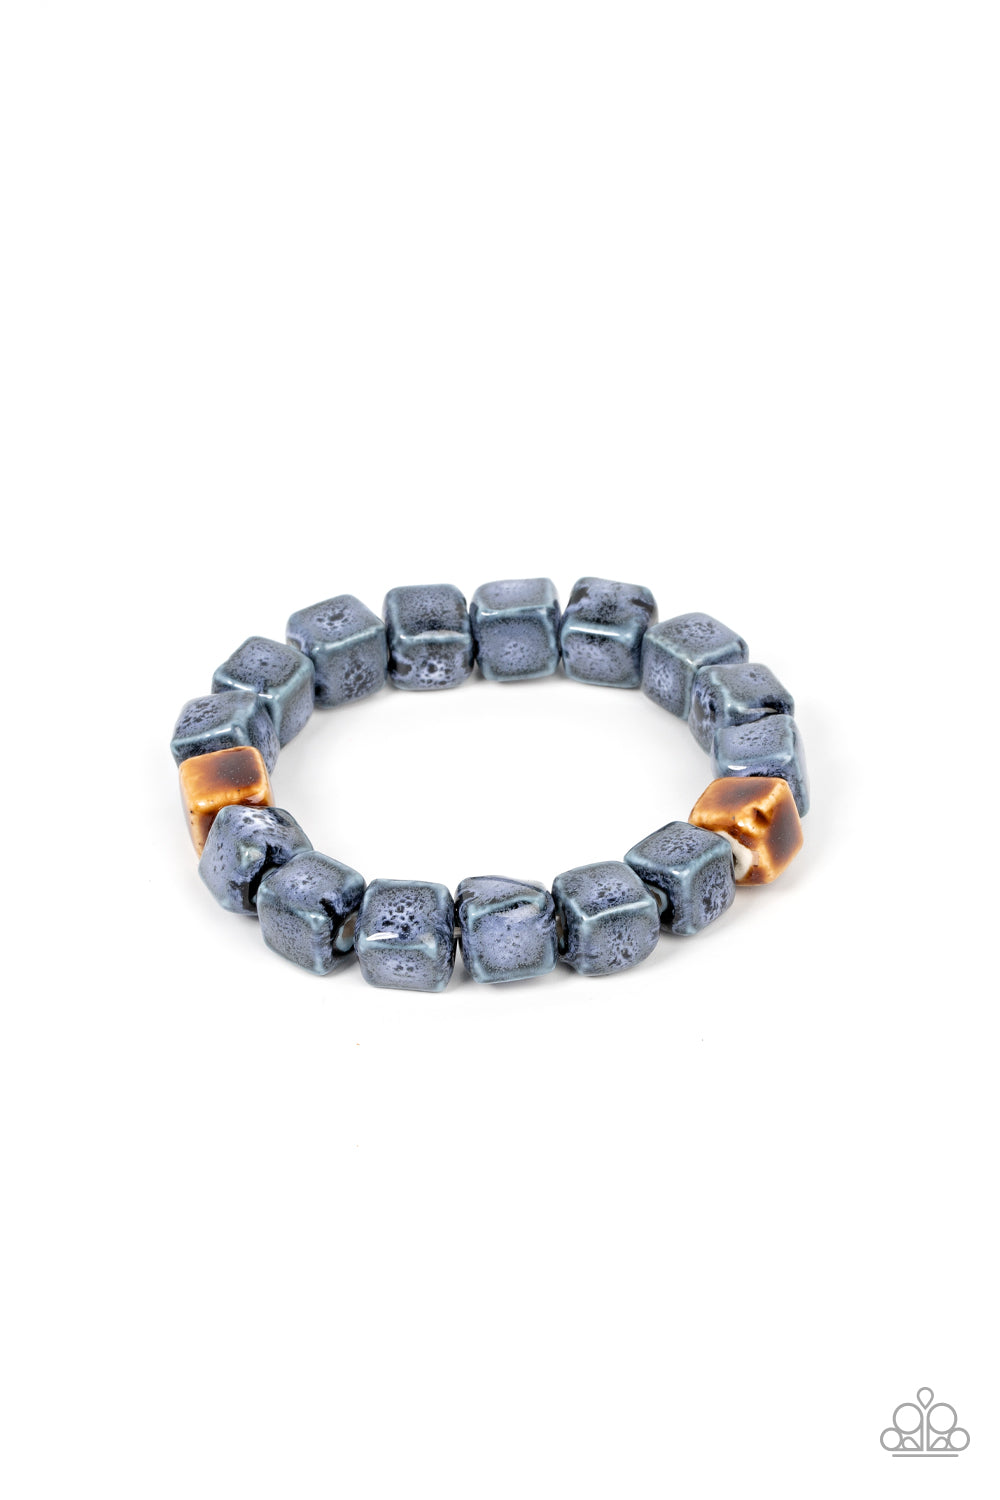 Glaze Craze - Blue - Brown Cube Bead Bracelet - Paparazzi Accessories - 
Featuring distressed blue and brown glazed finishes, a rustic collection of ceramic cube beads are threaded along stretchy bands around the wrist for a colorful flair. Sold as one individual bracelet.
